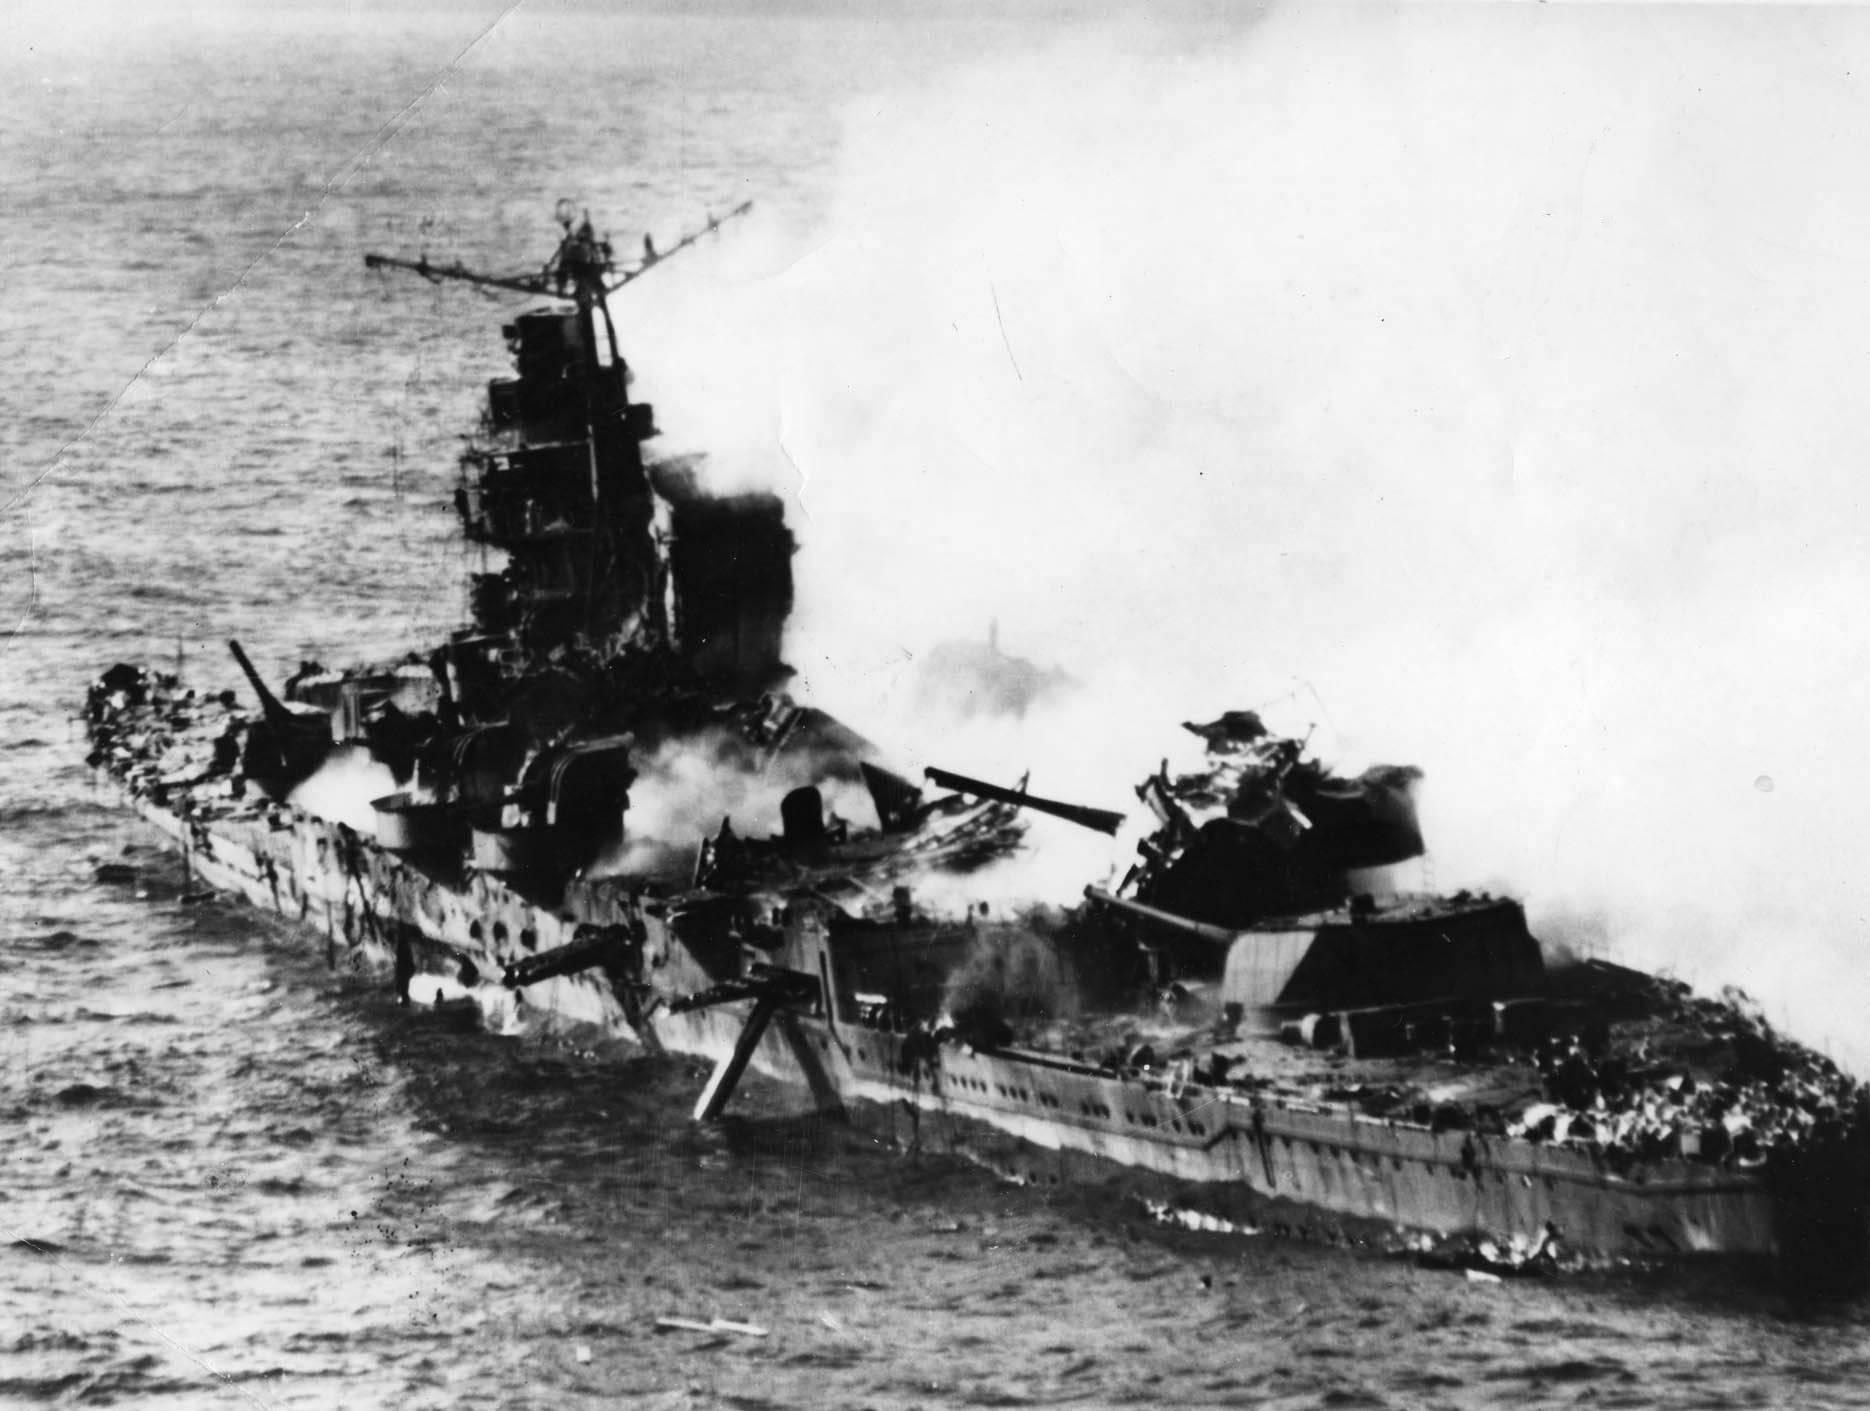 Mikuma burning, with midships structure shattered and torpedo dangling from tube, 6 Jun 1942